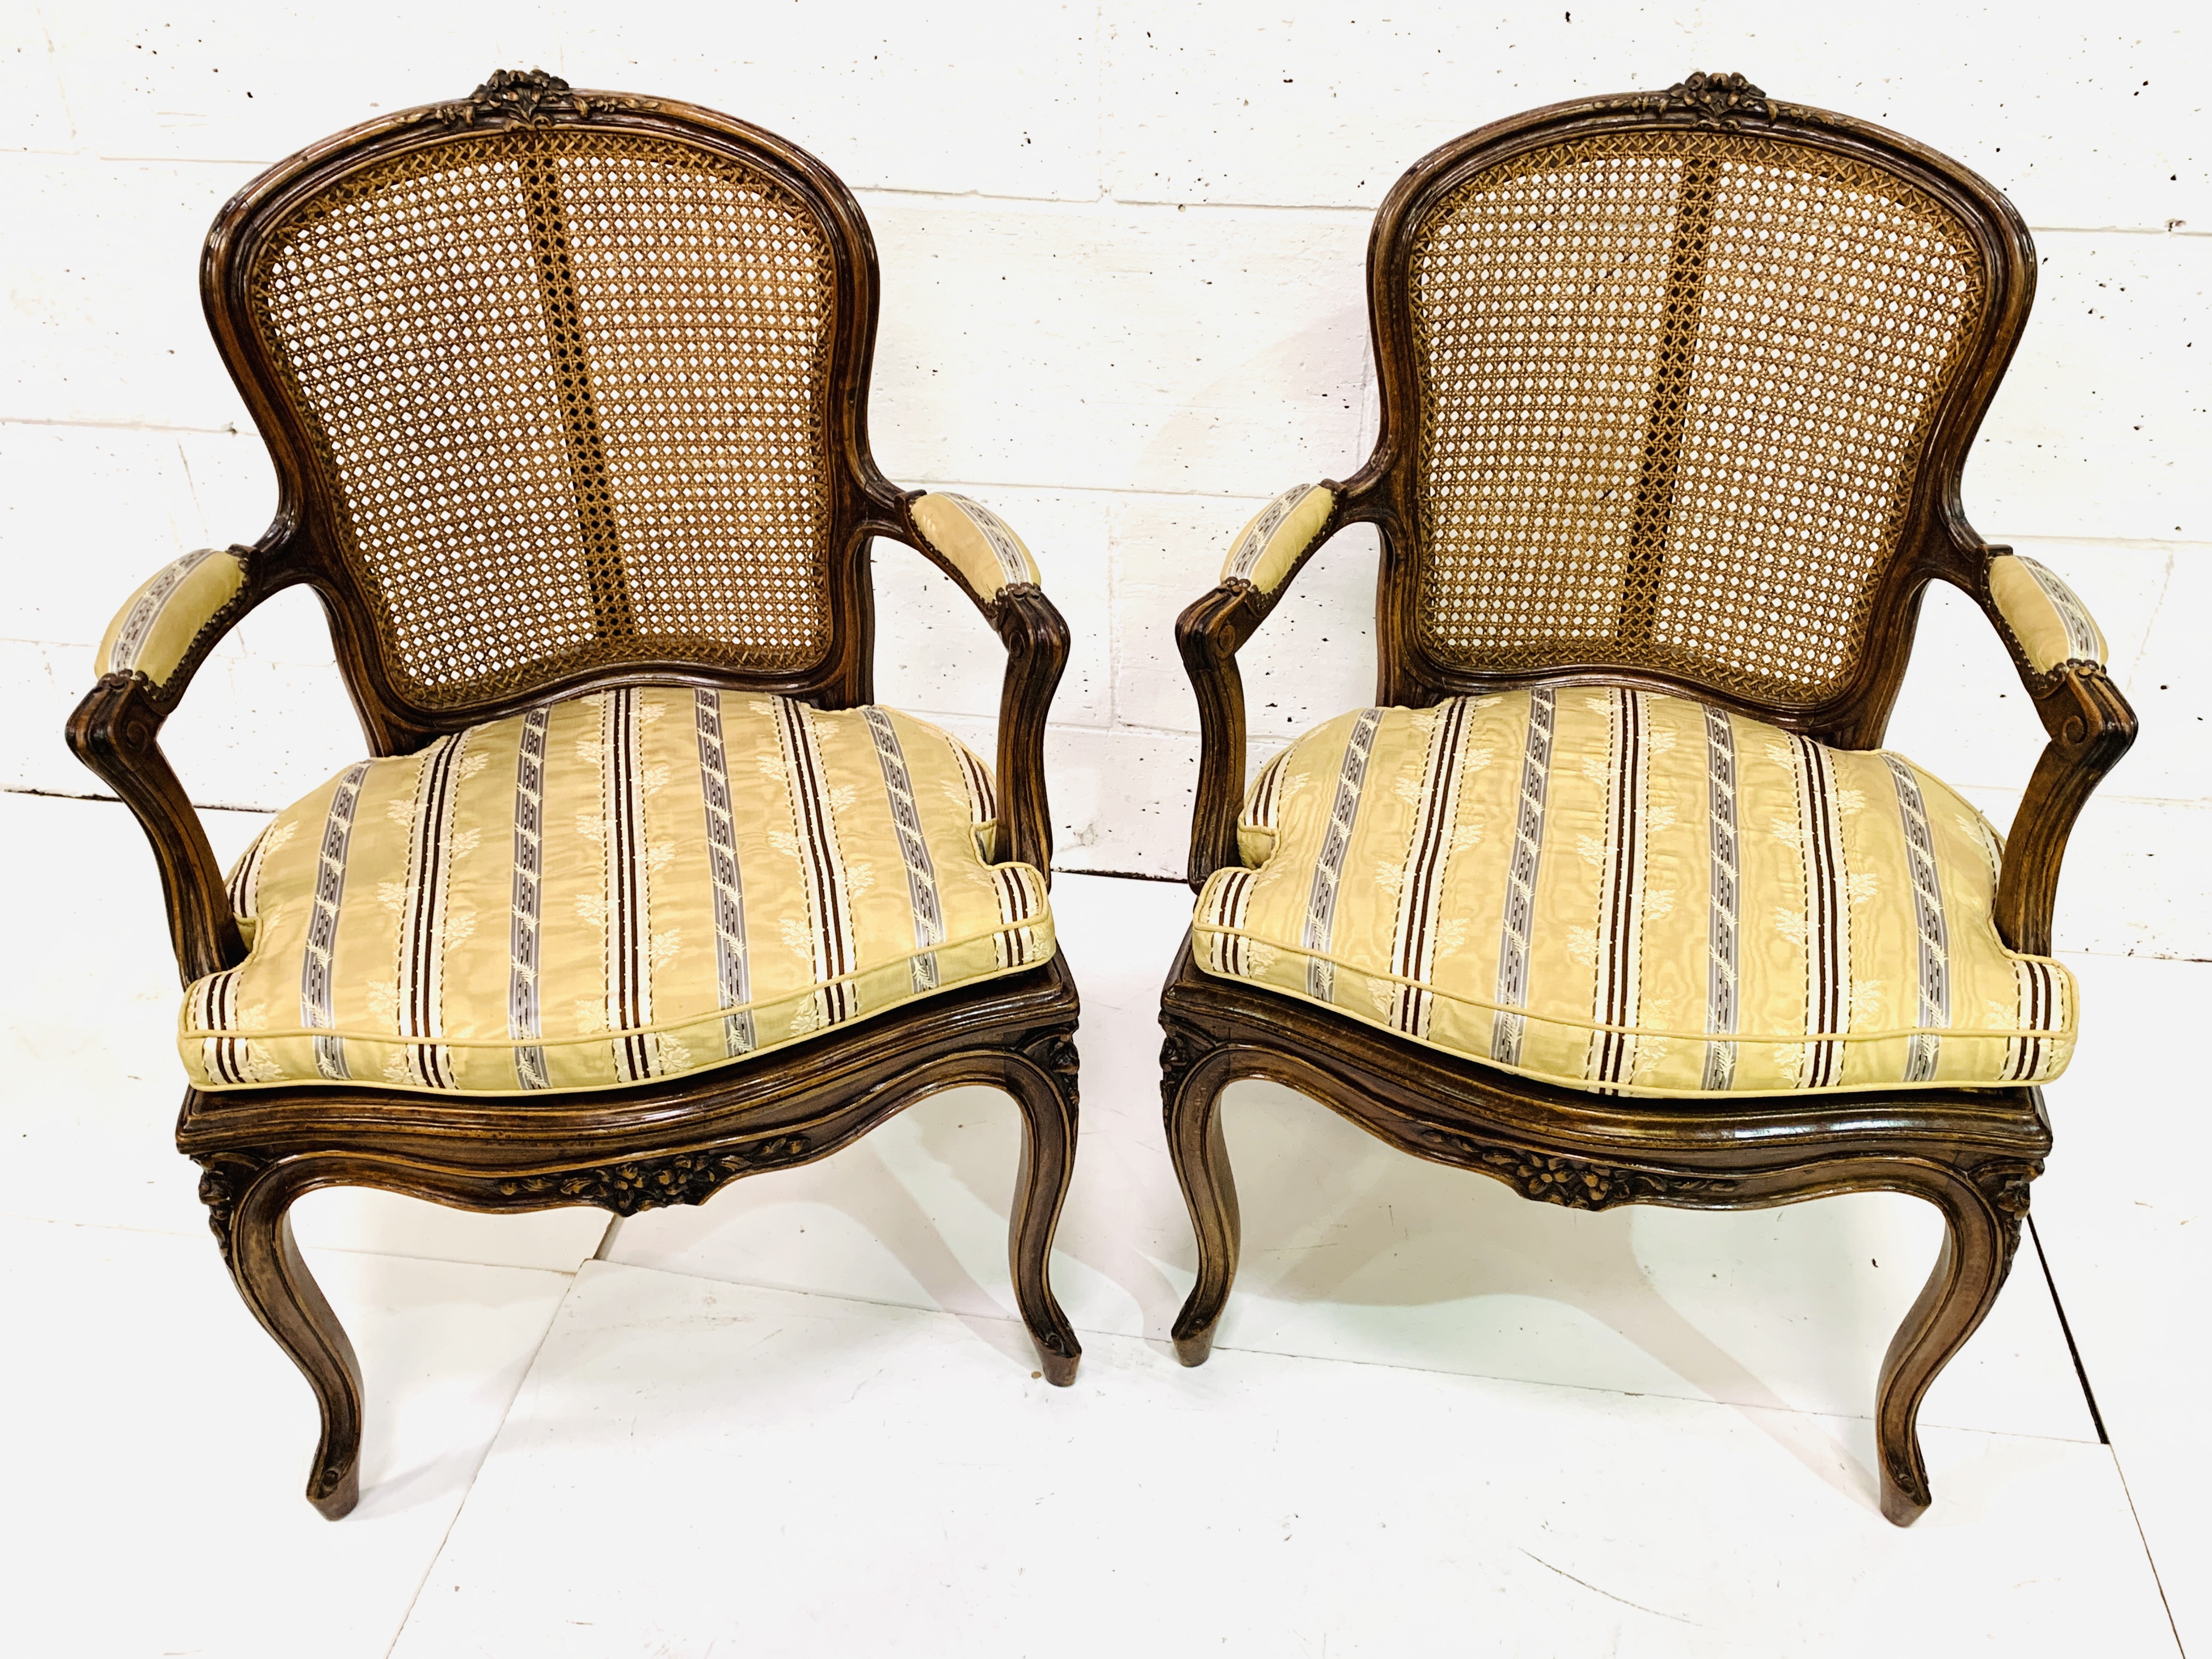 Pair of French style open arm chairs - Image 5 of 5